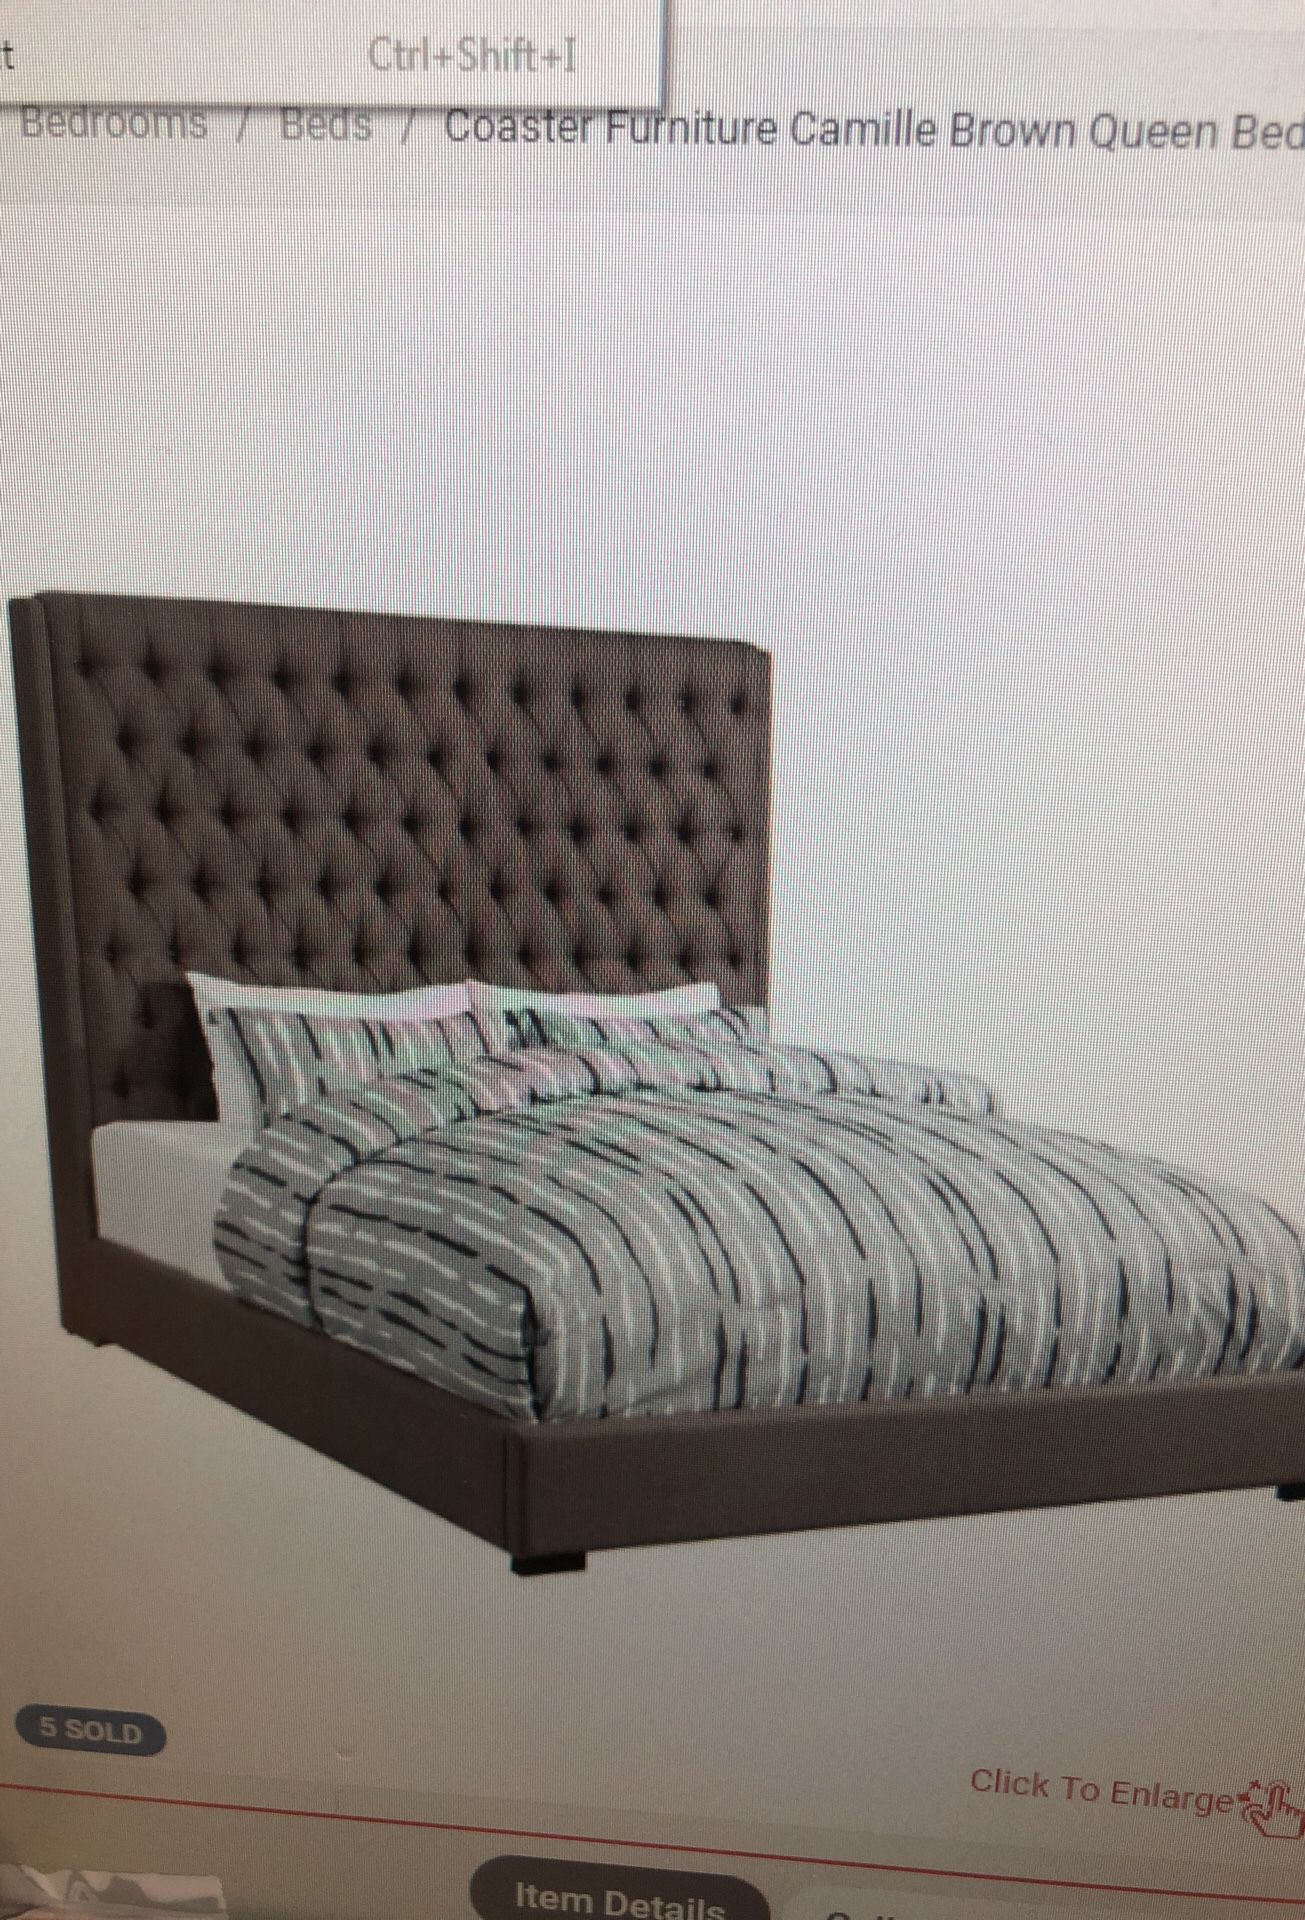 Coaster Furniture Camille Brown Bed ( STILL IN BOX)